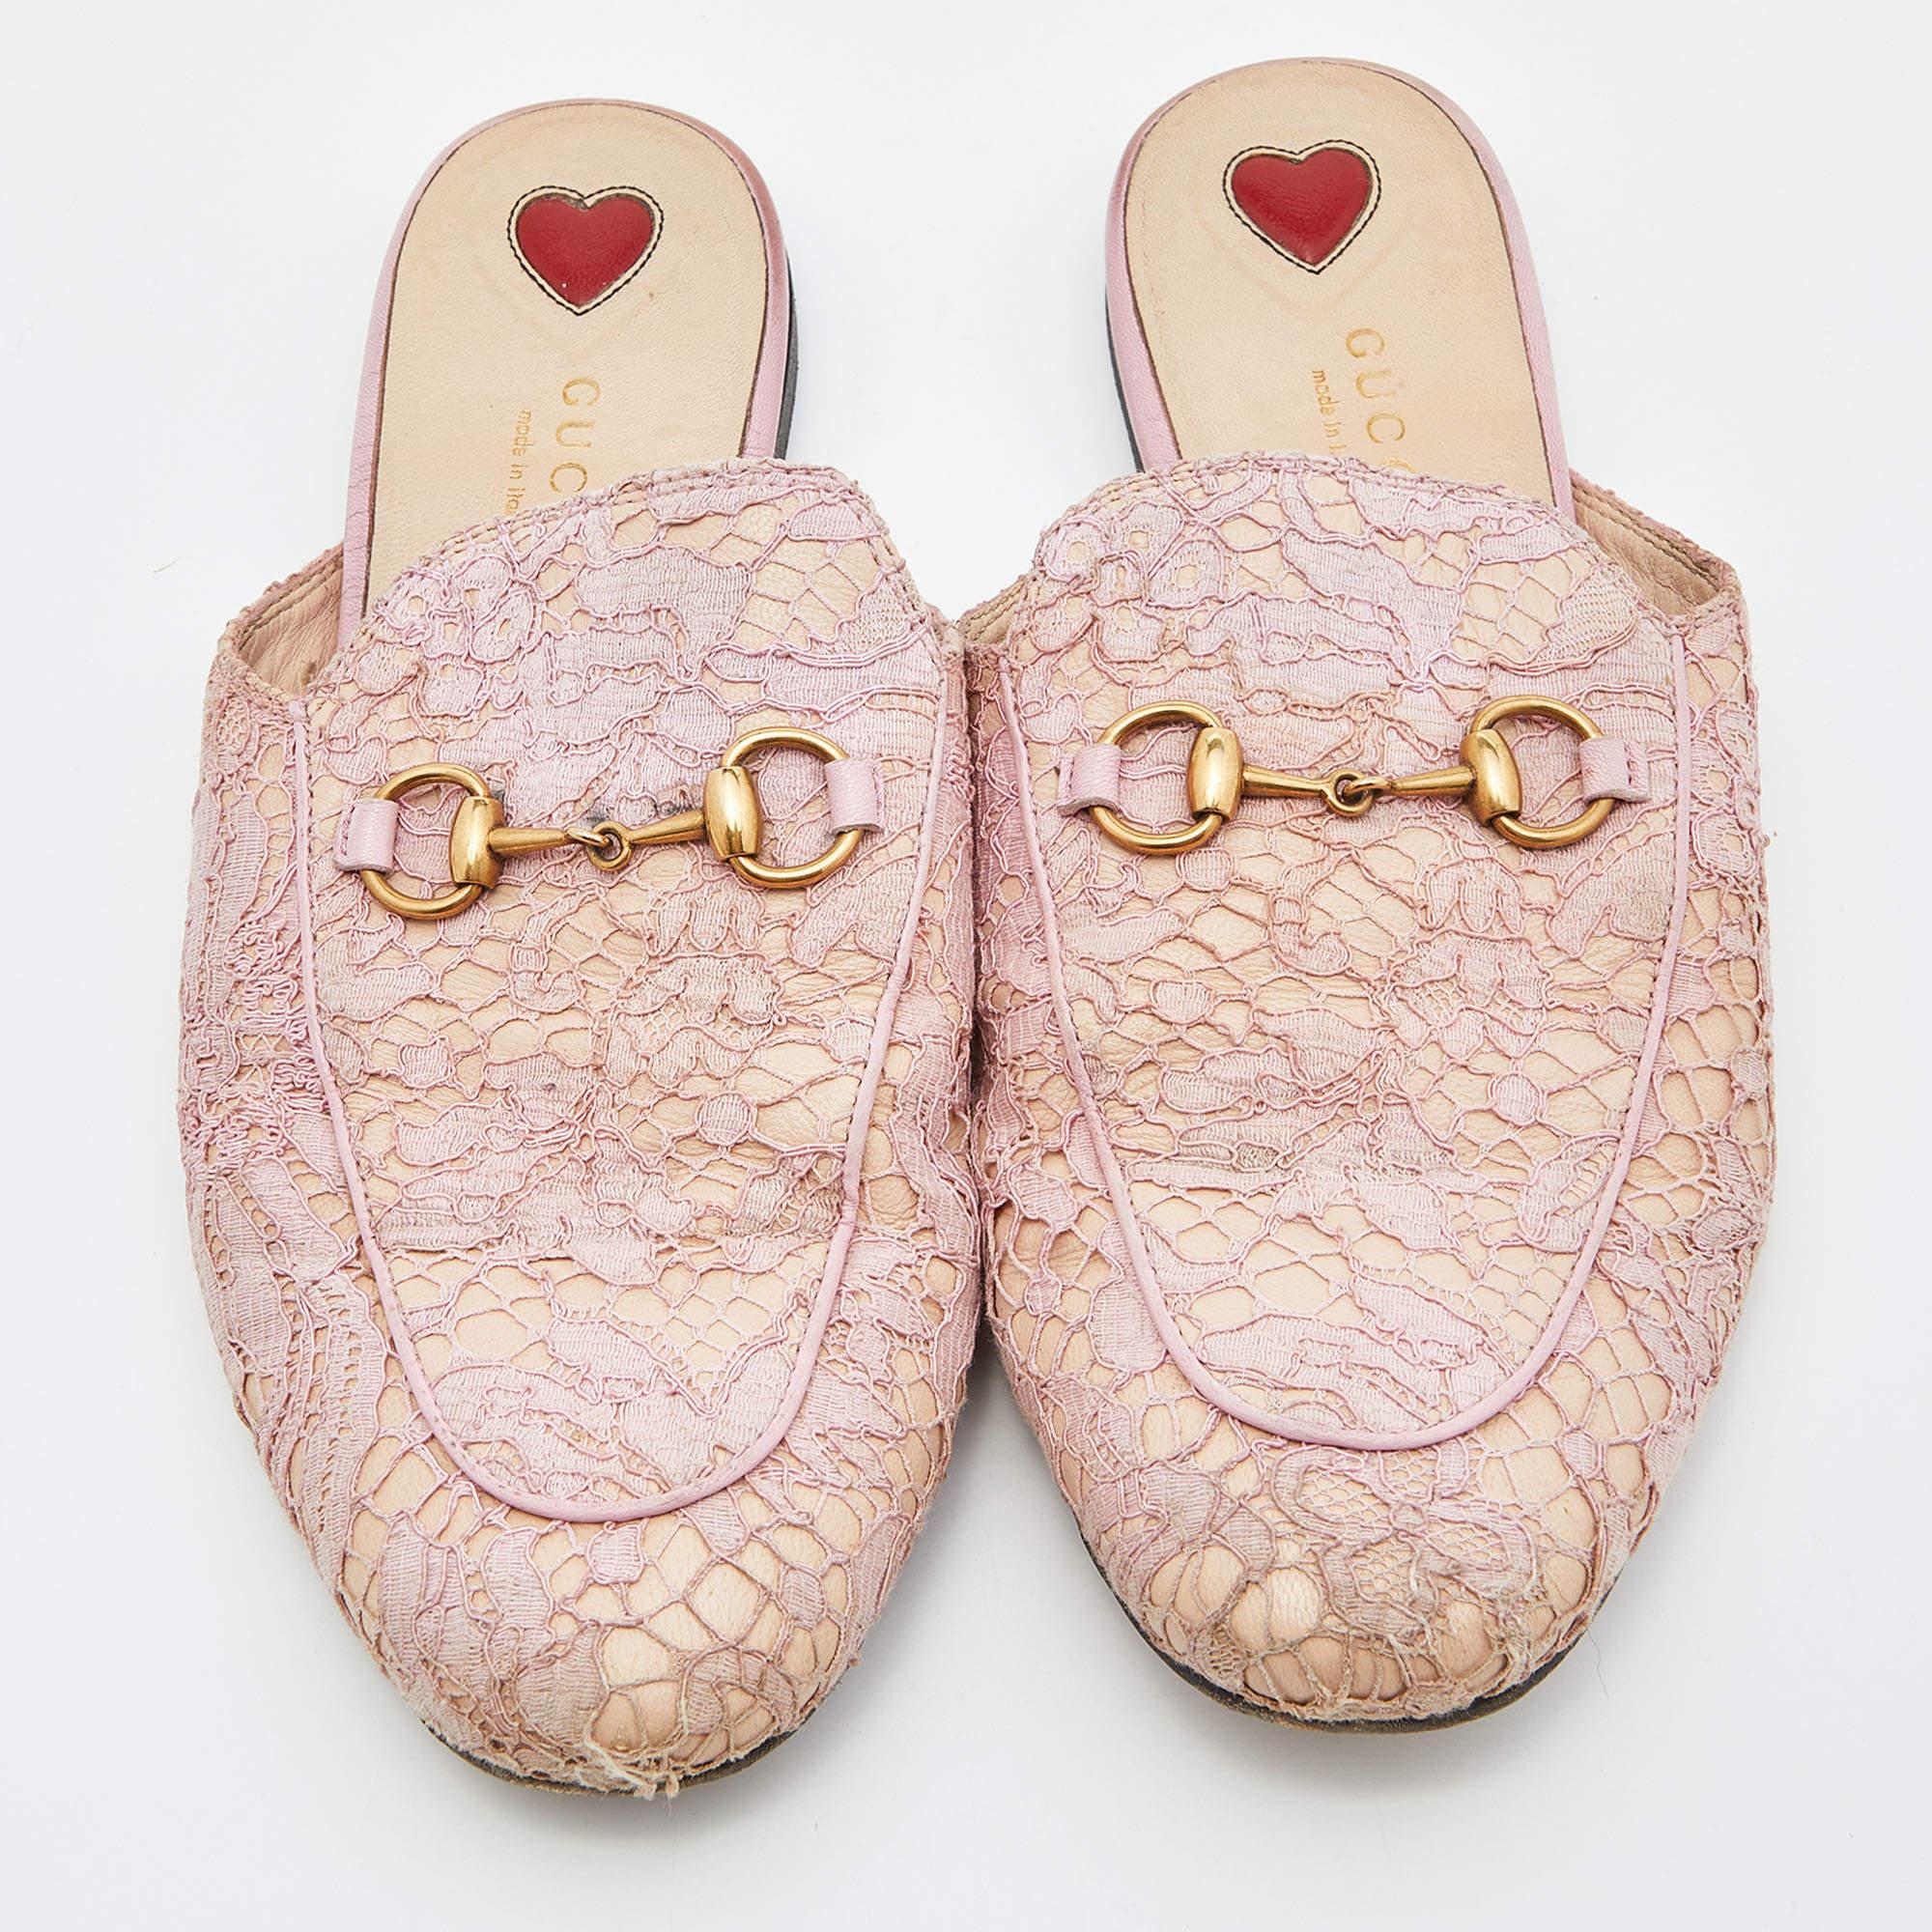 These Gucci Princetown mules are a fresh update on the perennially chic Gucci horsebit loafers. These shoes are enhanced by a gold-tone horsebit detail that has defined the Gucci collection since the very beginning. Featuring a floral lace and